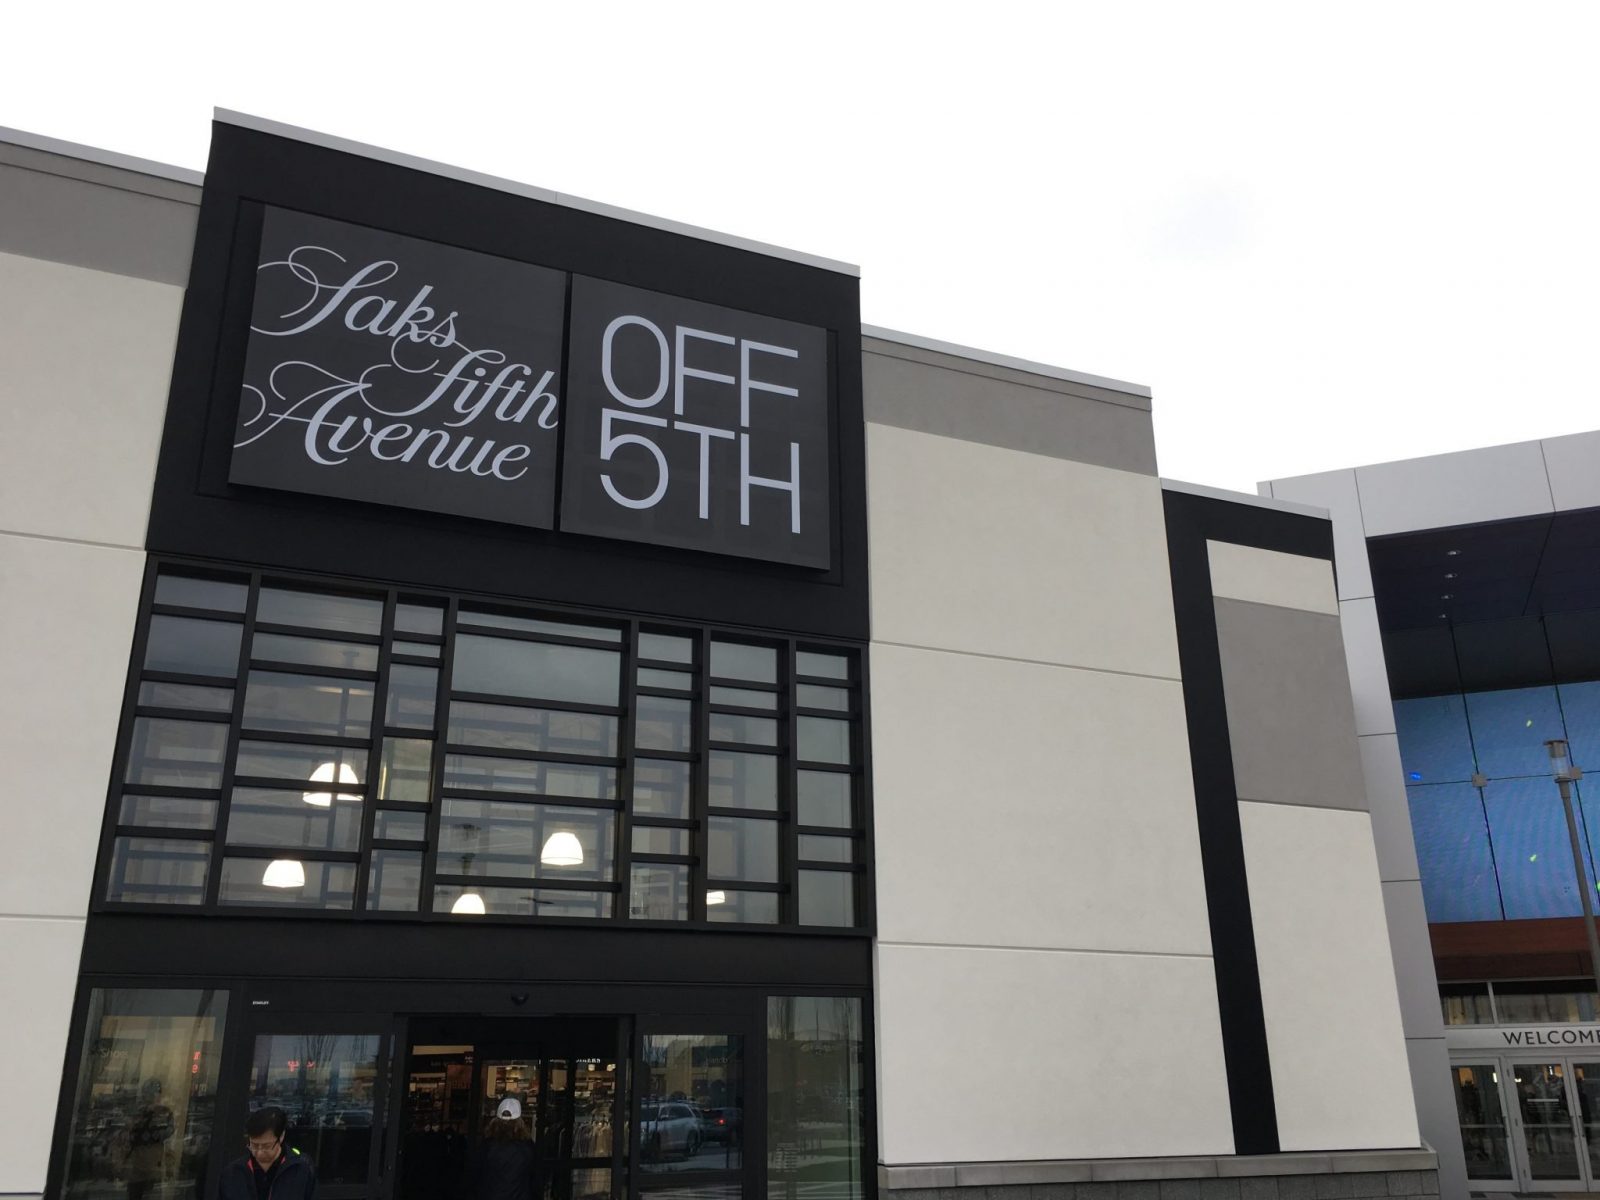 CrossIron Mills to open first Saks Fifth Avenue OFF 5TH store in Western  Canada